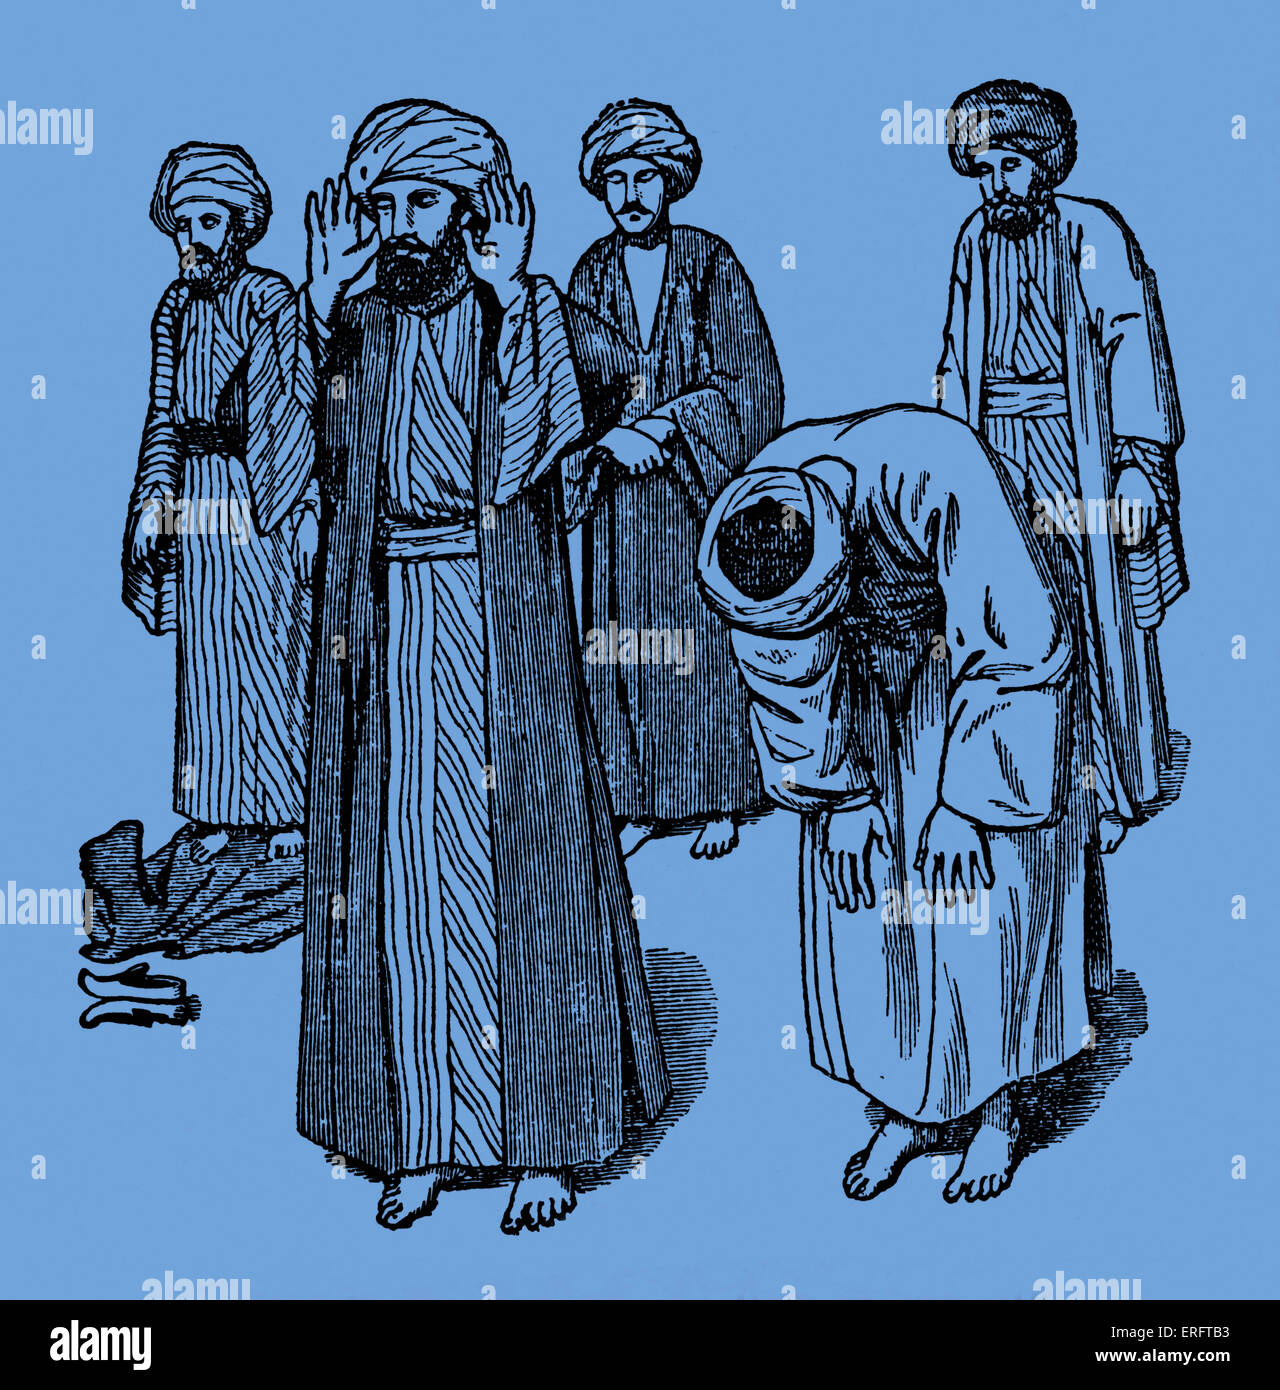 Muslim prayer positions - from 'Manners and Customs' by Lane (prayers are made five times a day). Stock Photo